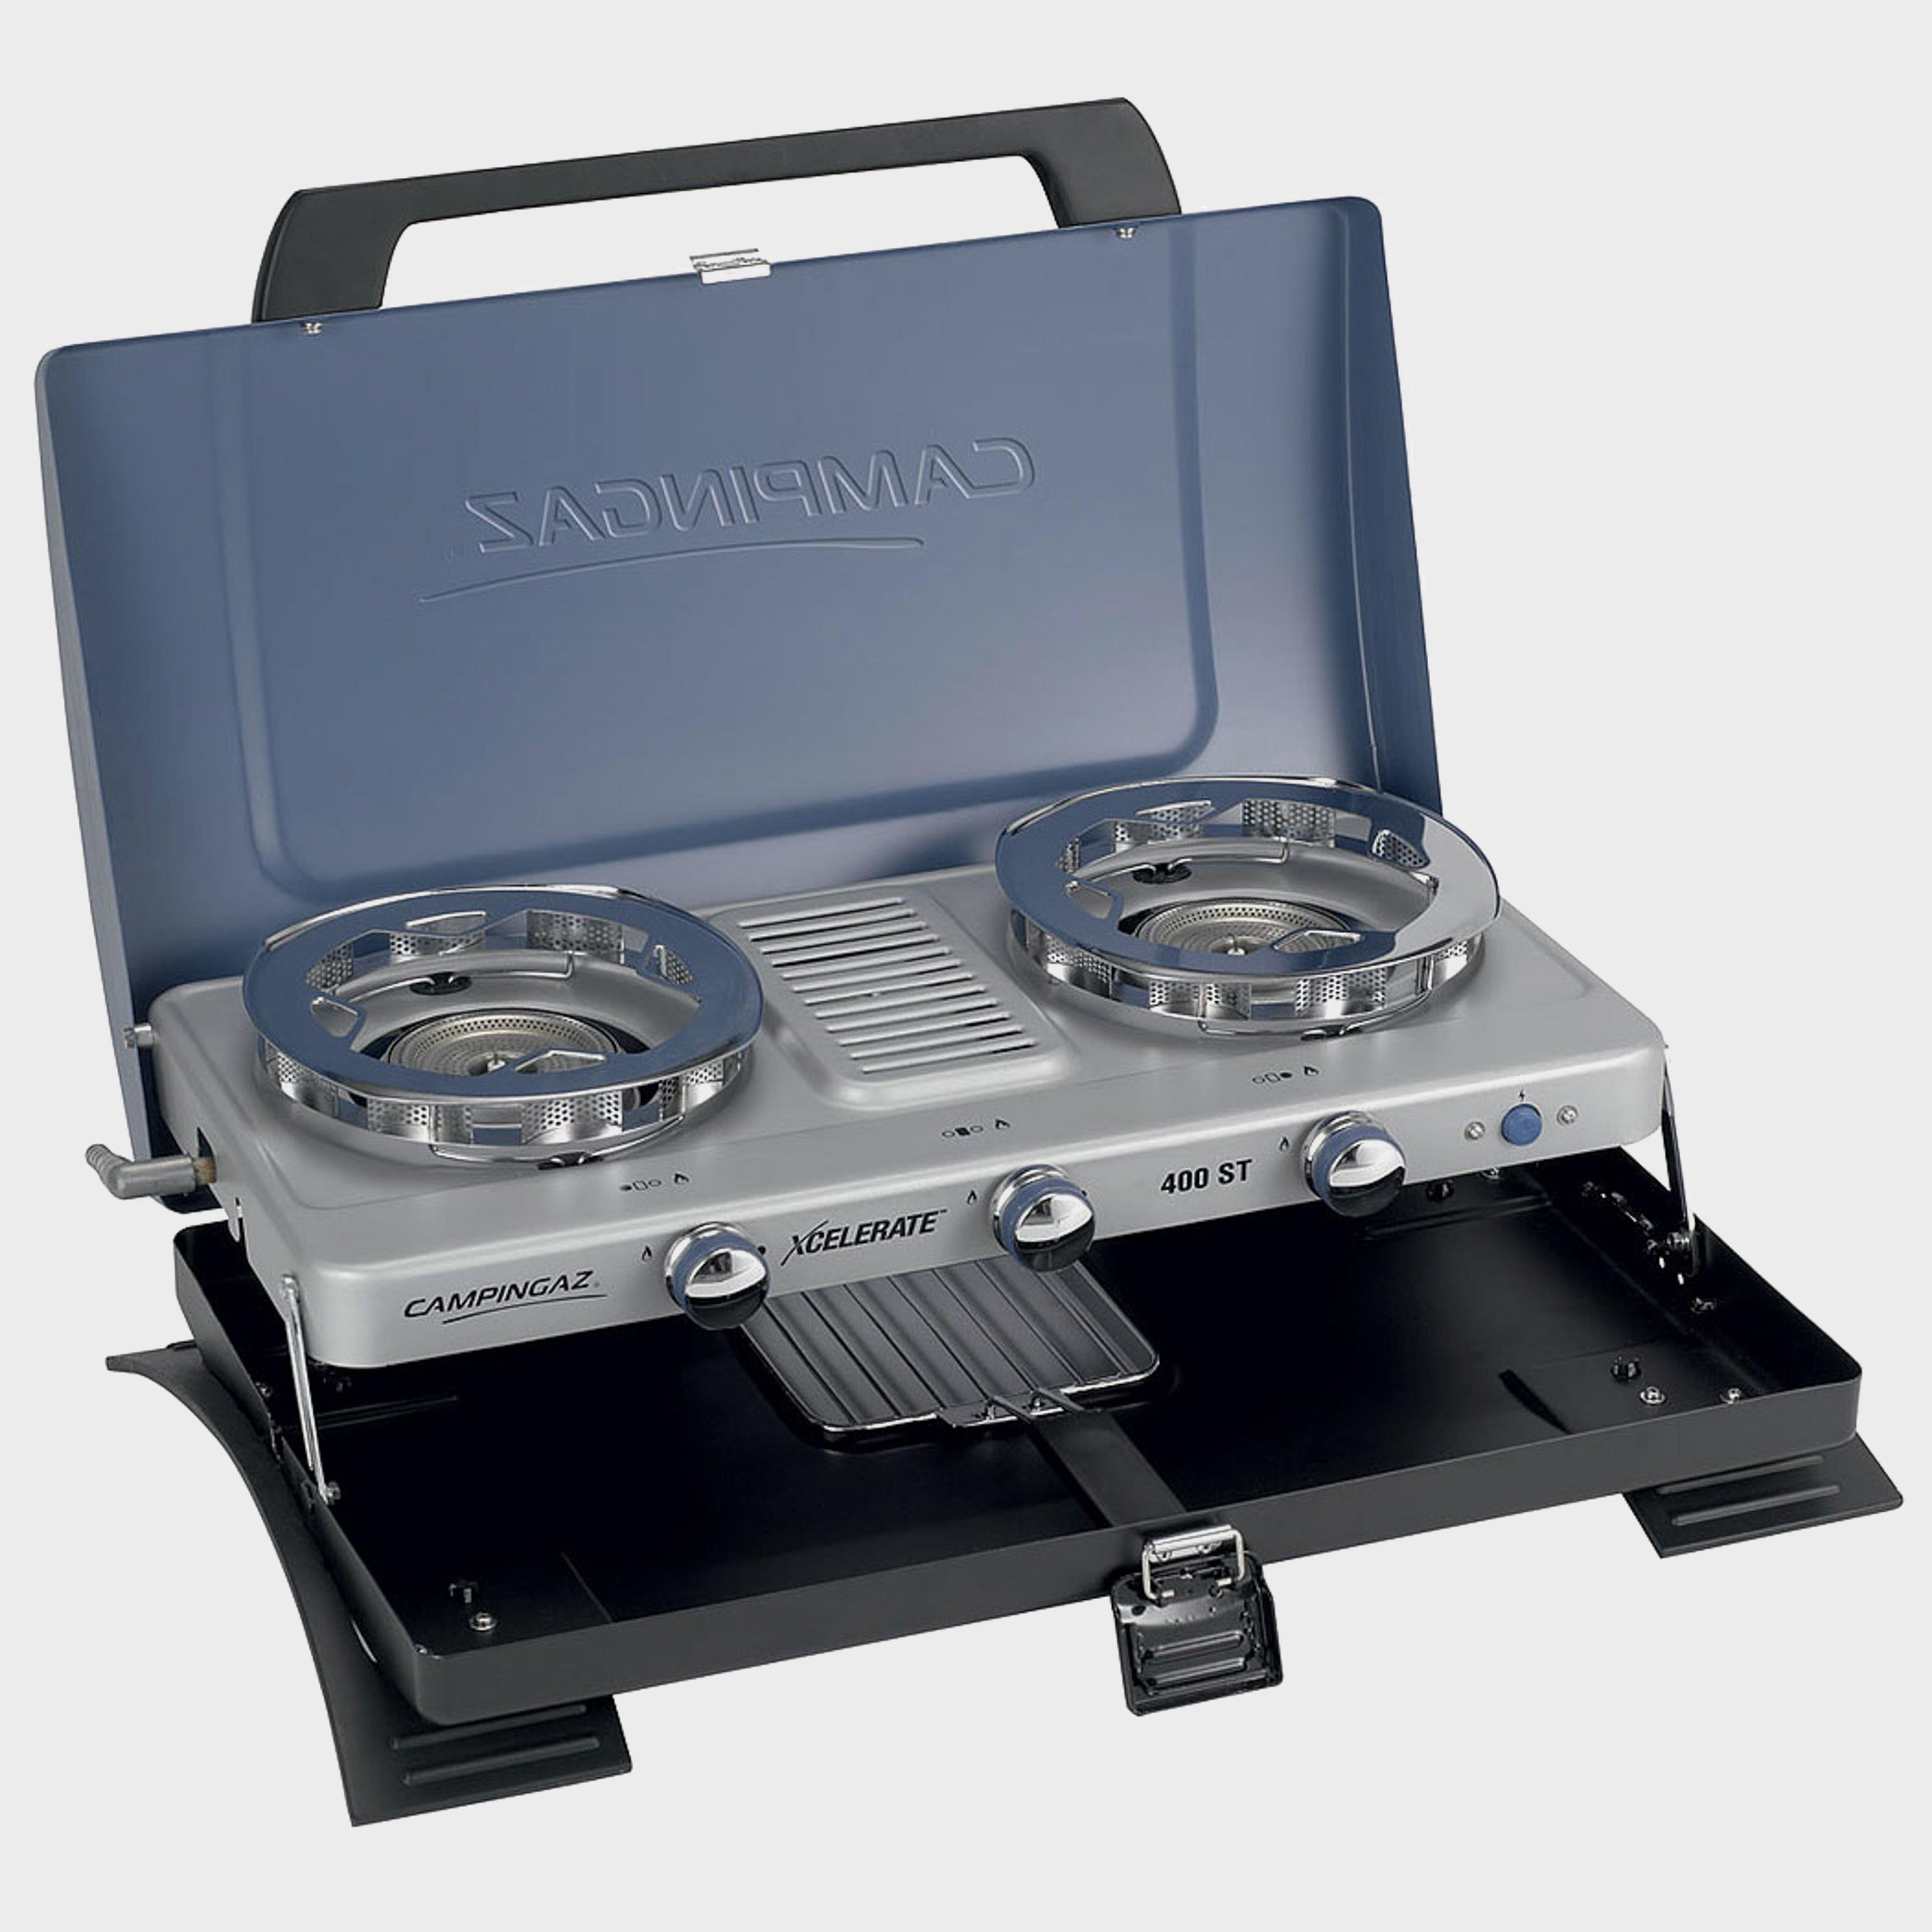 Campingaz Xcelerate 400st Double Burner Stove And Toaster  Blue